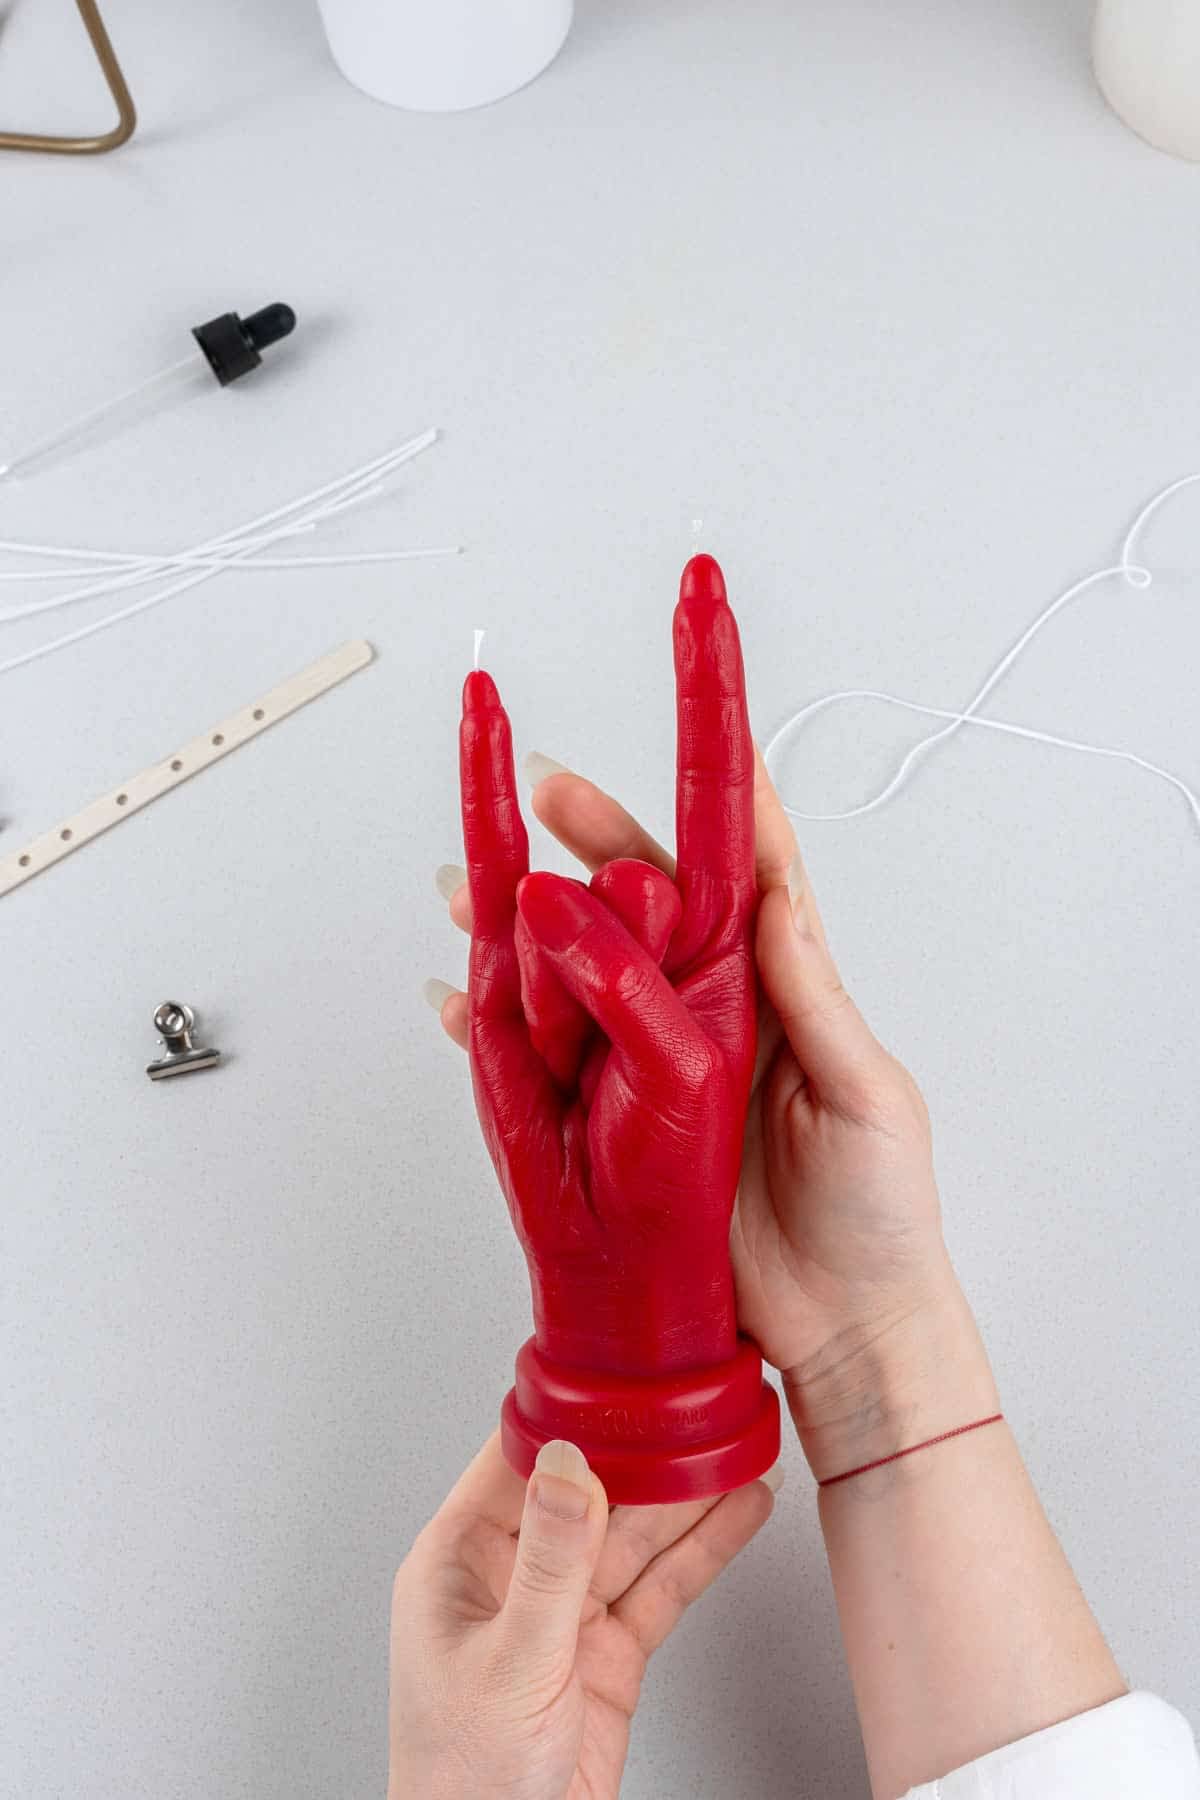 ⚡︎-SUPER-YOU-AWARD-crafting-cool-unique-gift-idea-empowering-hand-gesture-collectible-decorative-red-candle-YOU-ROCK-2-Aivaras-Simonis-photo